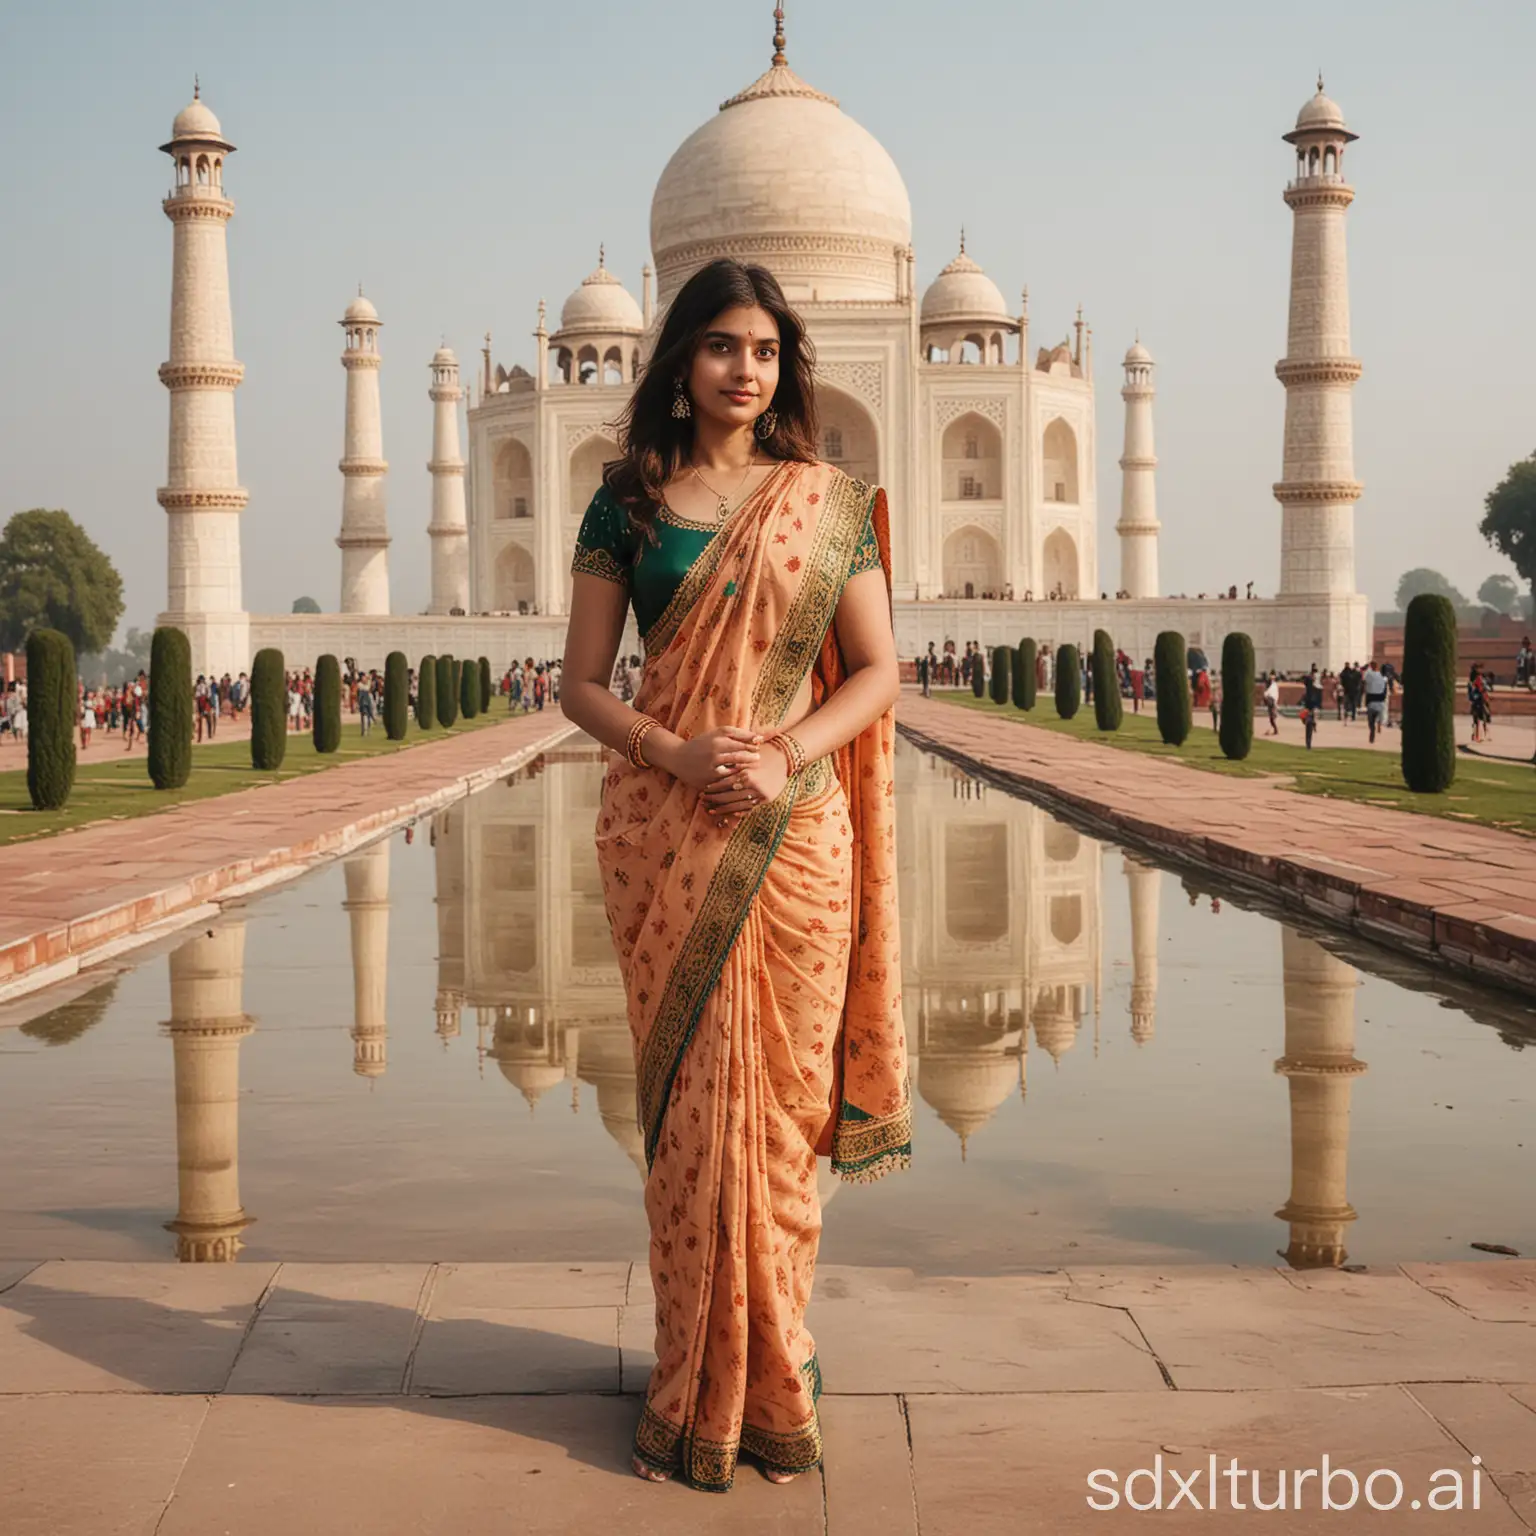 A girl in a traditional Indian saree, standing in front of the Taj Mahal with her friend.